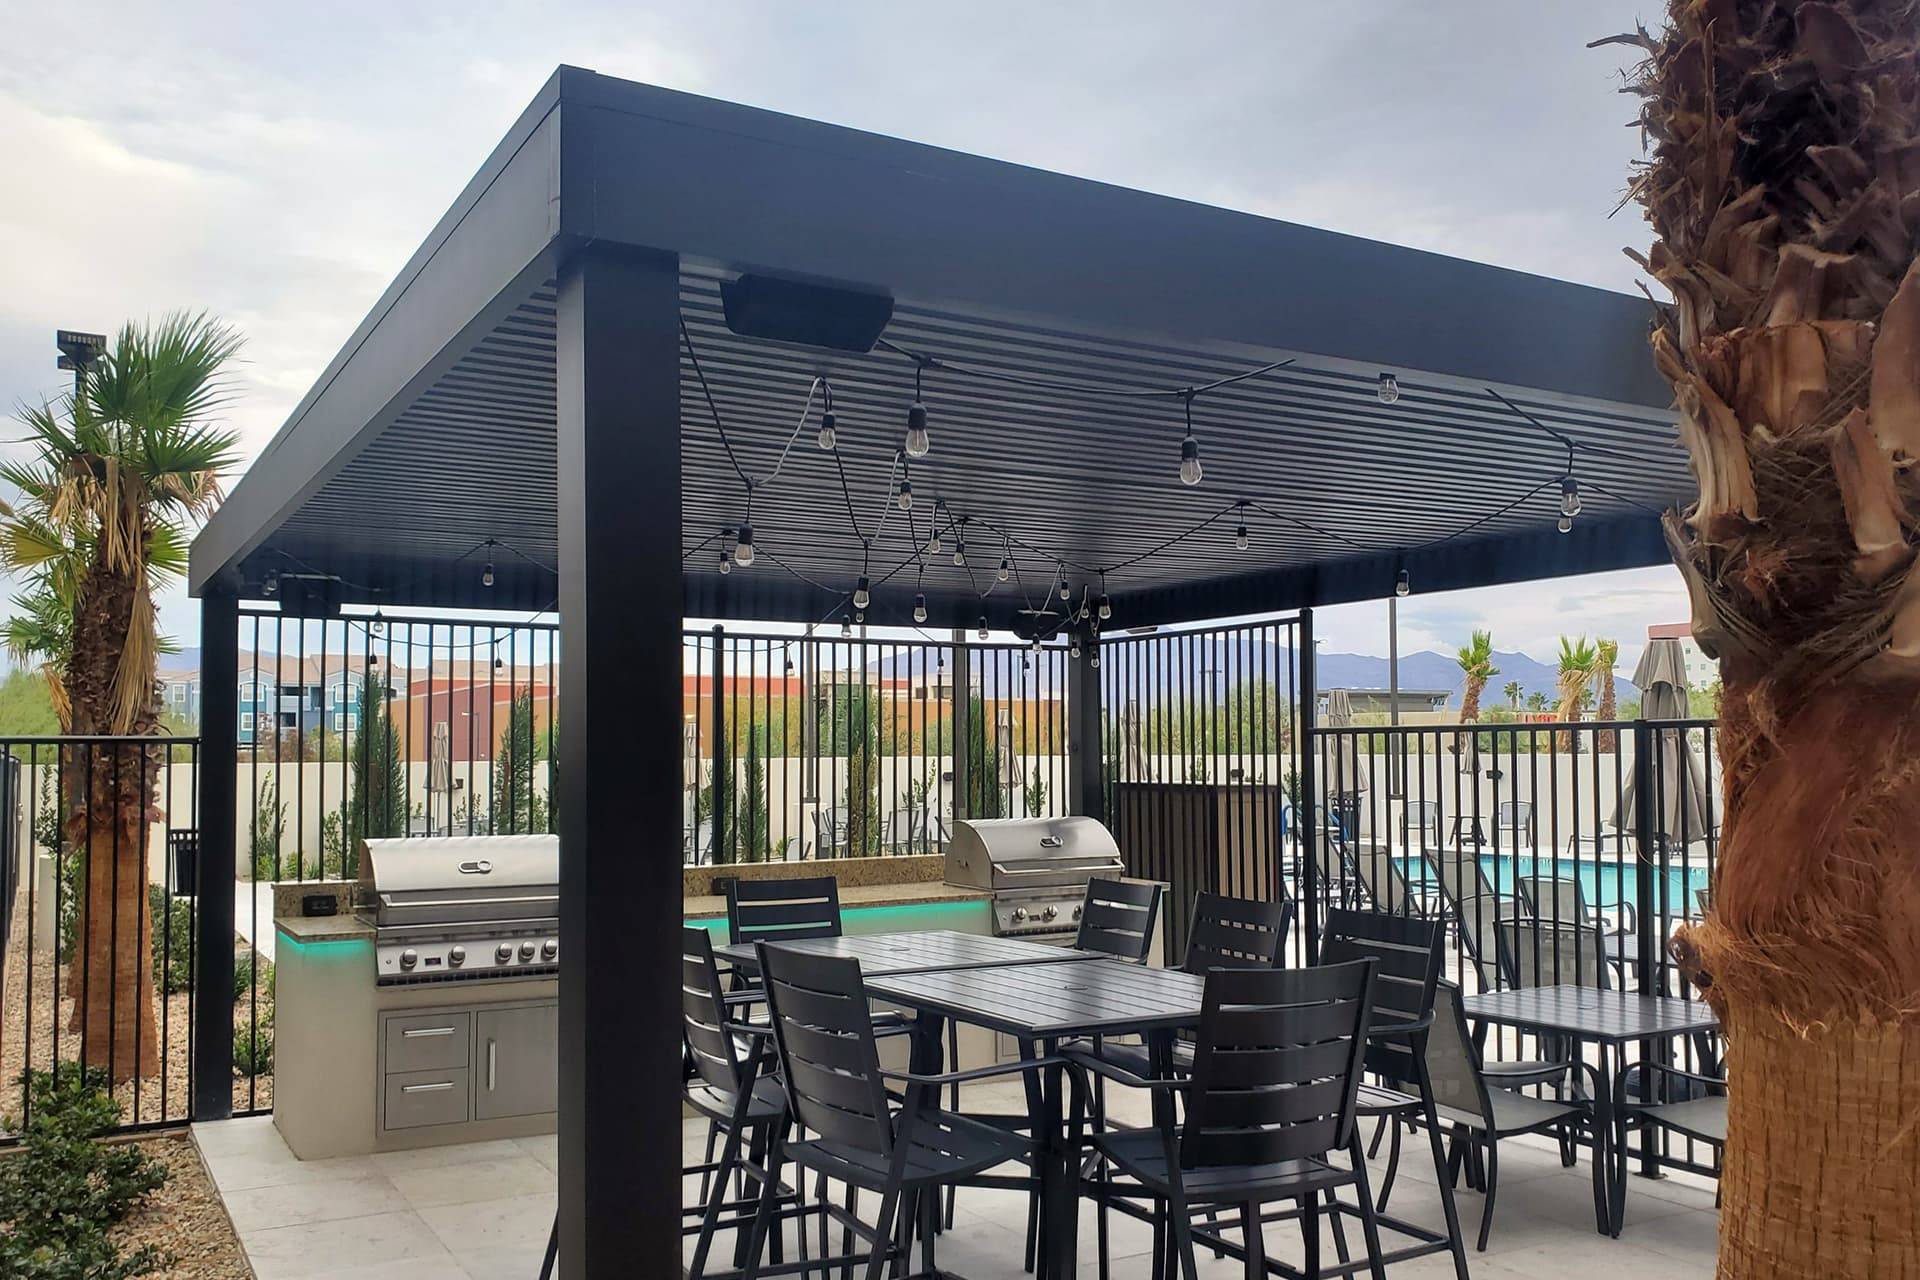 A commercial patio cover in the style of a pergola, with dining and outdoor dining appliances underneath